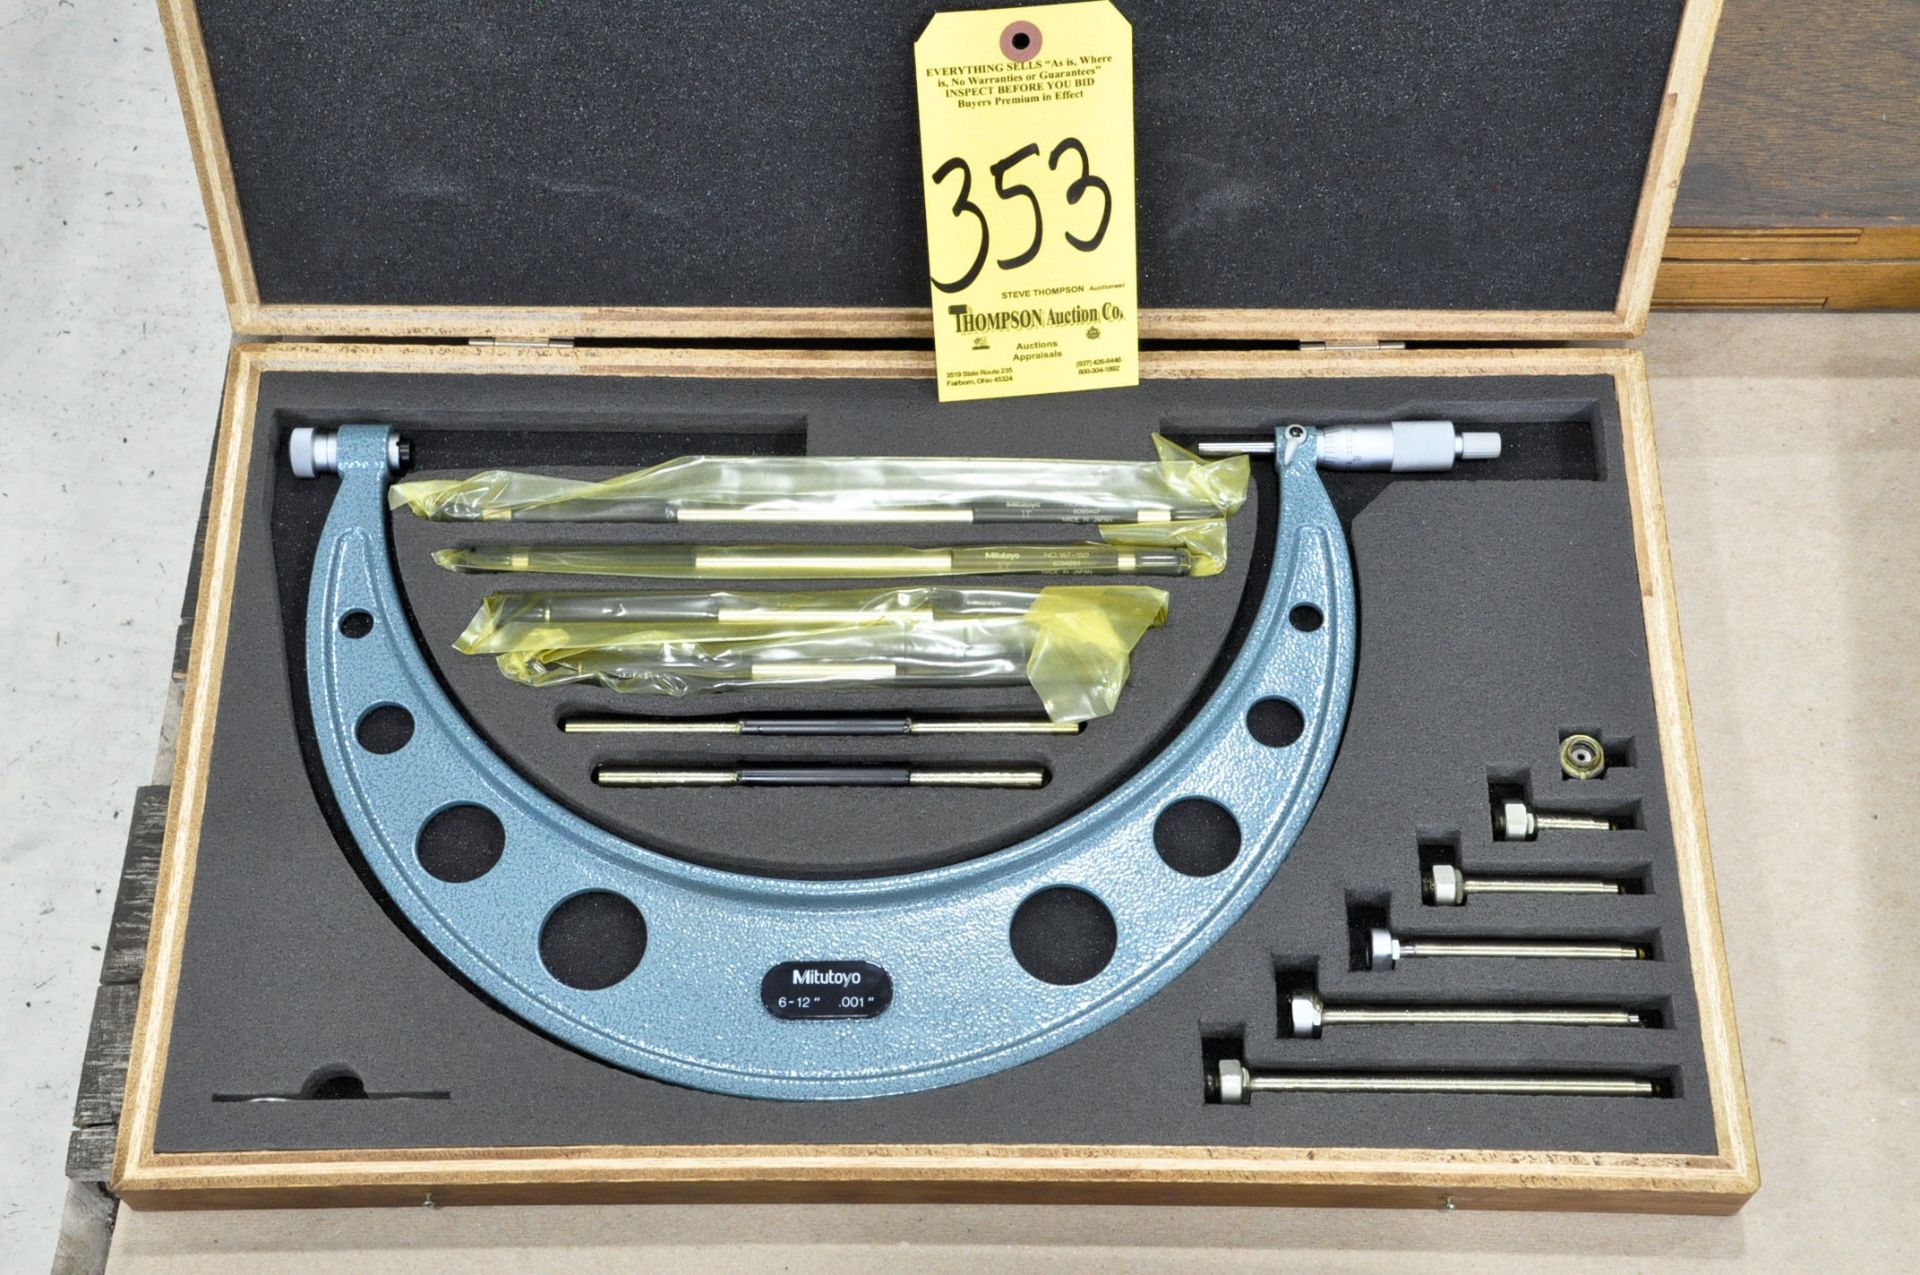 Mitutoyo 6 - 12" Outside Micrometer with Case